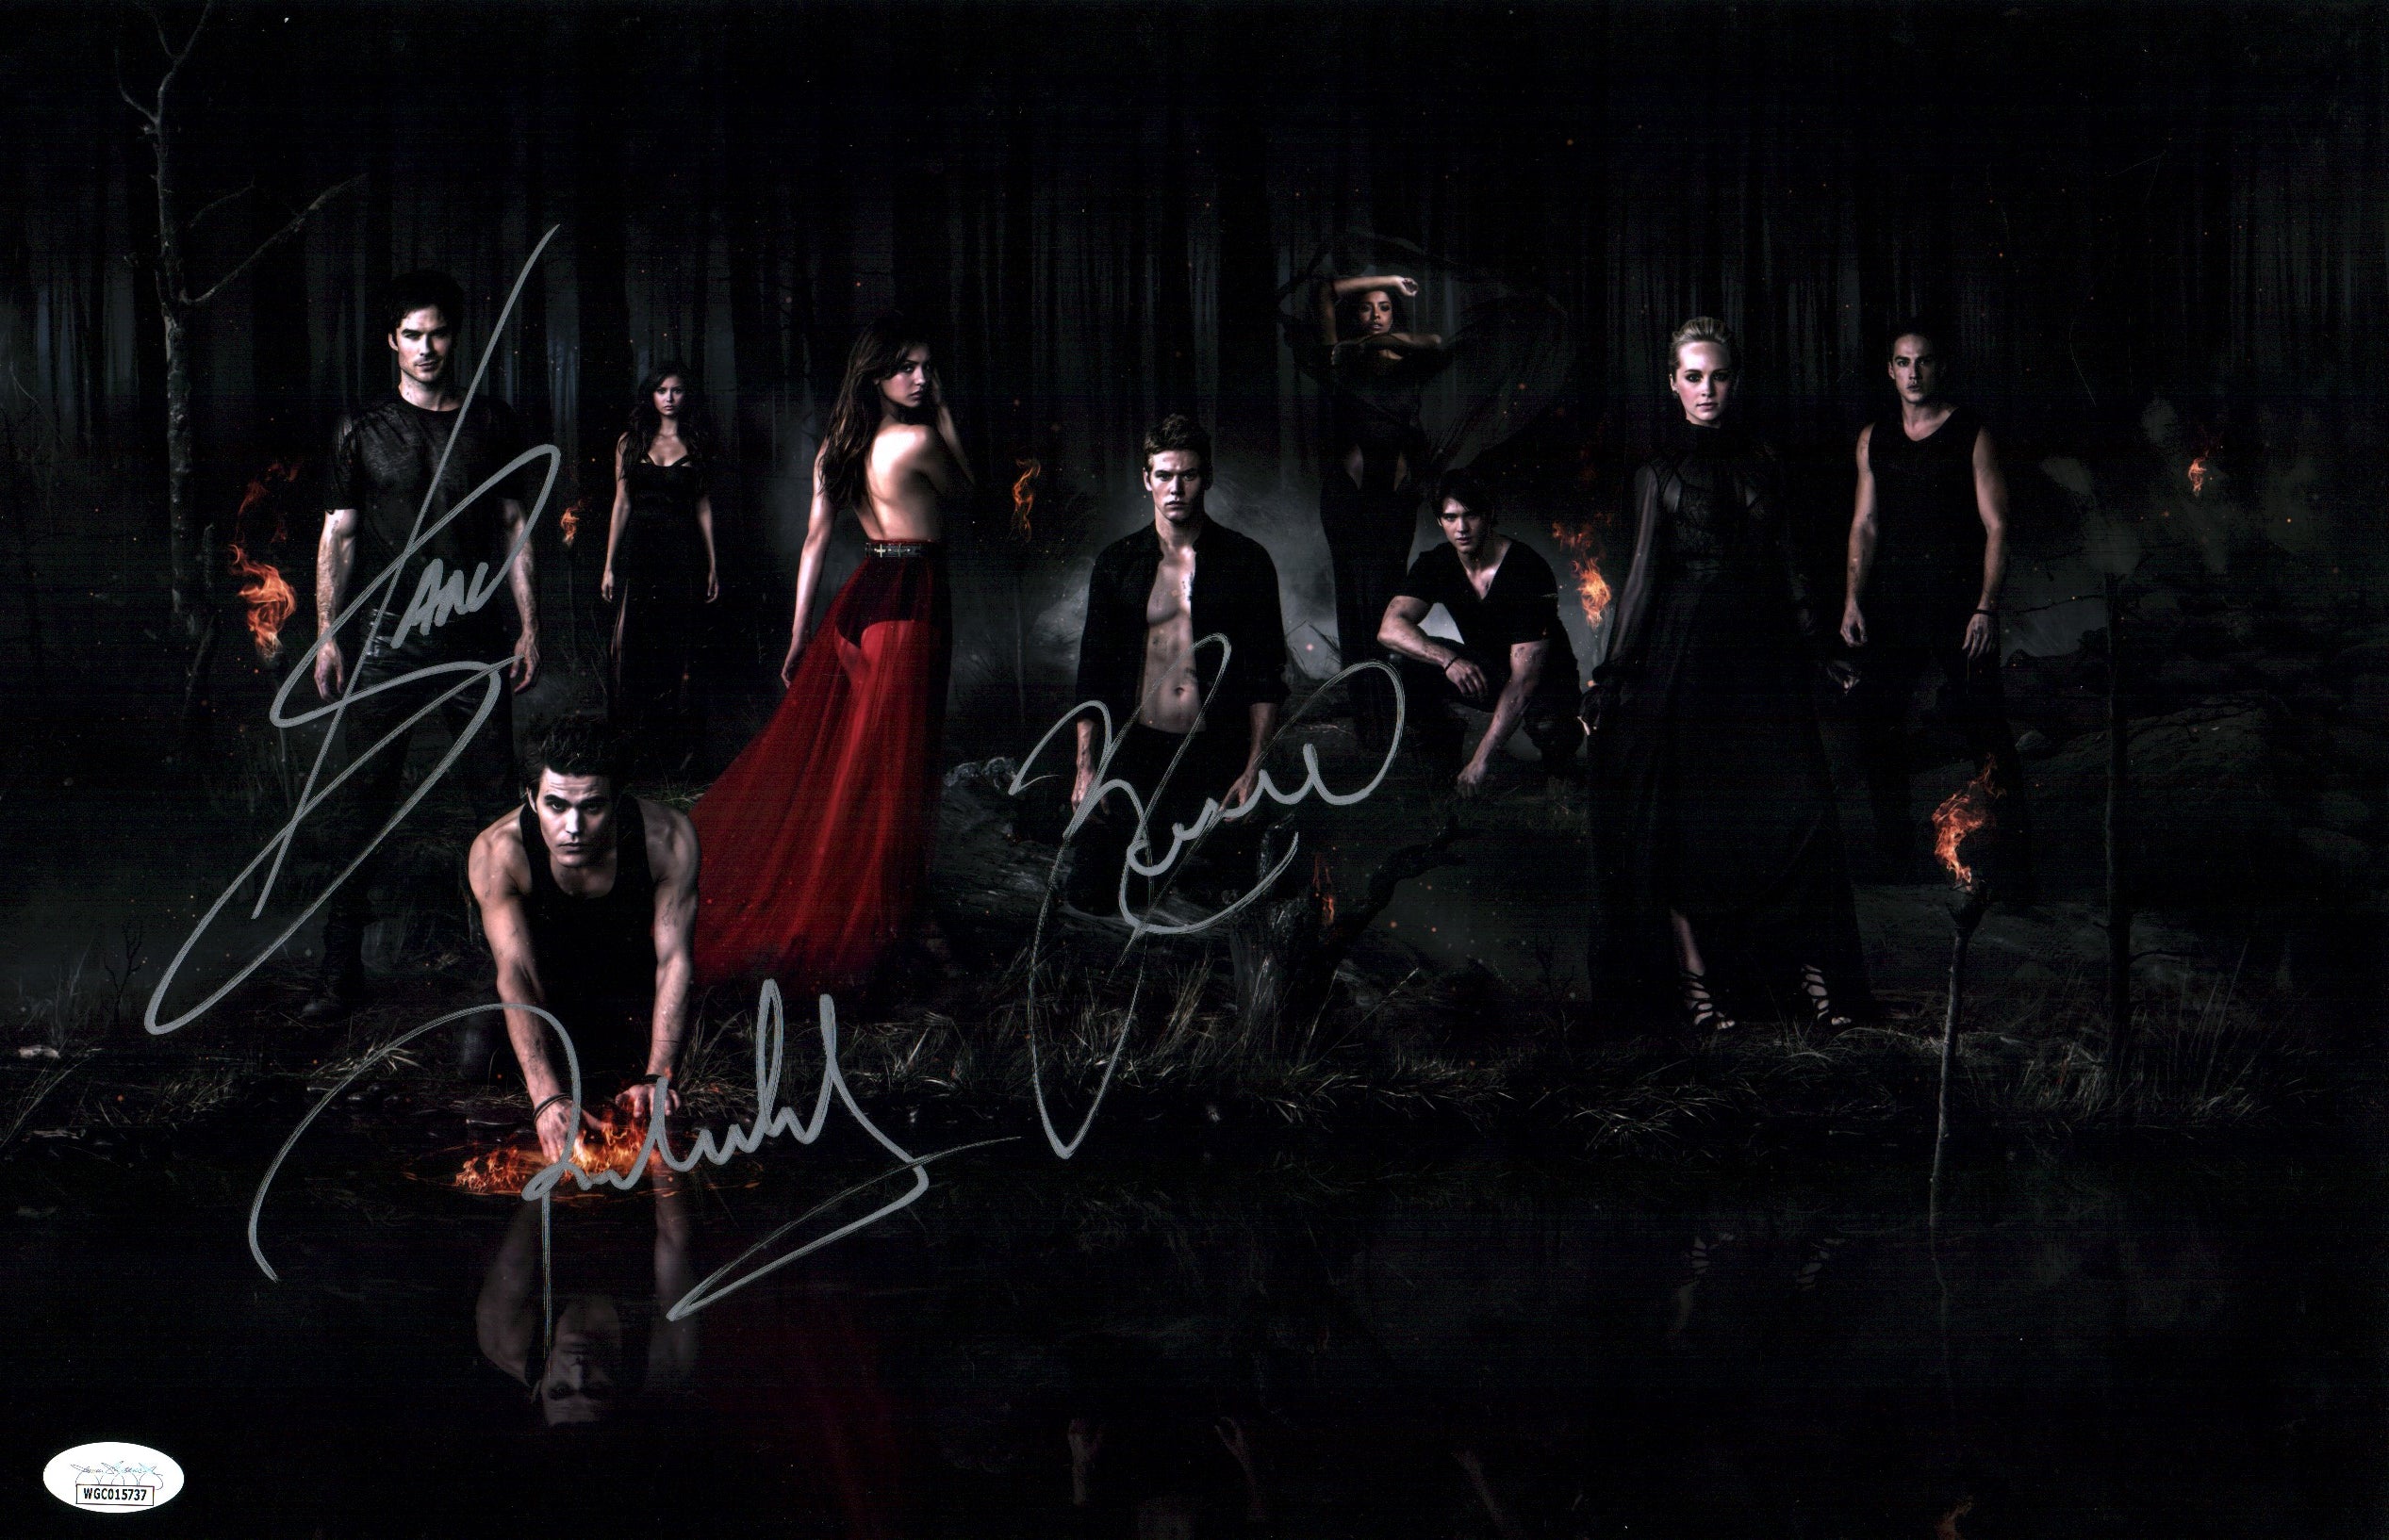 The Vampire Diaries 11x17 Signed Photo Poster Cast x3 Roerig, Wesely, Somerhalder JSA Certified Autograph